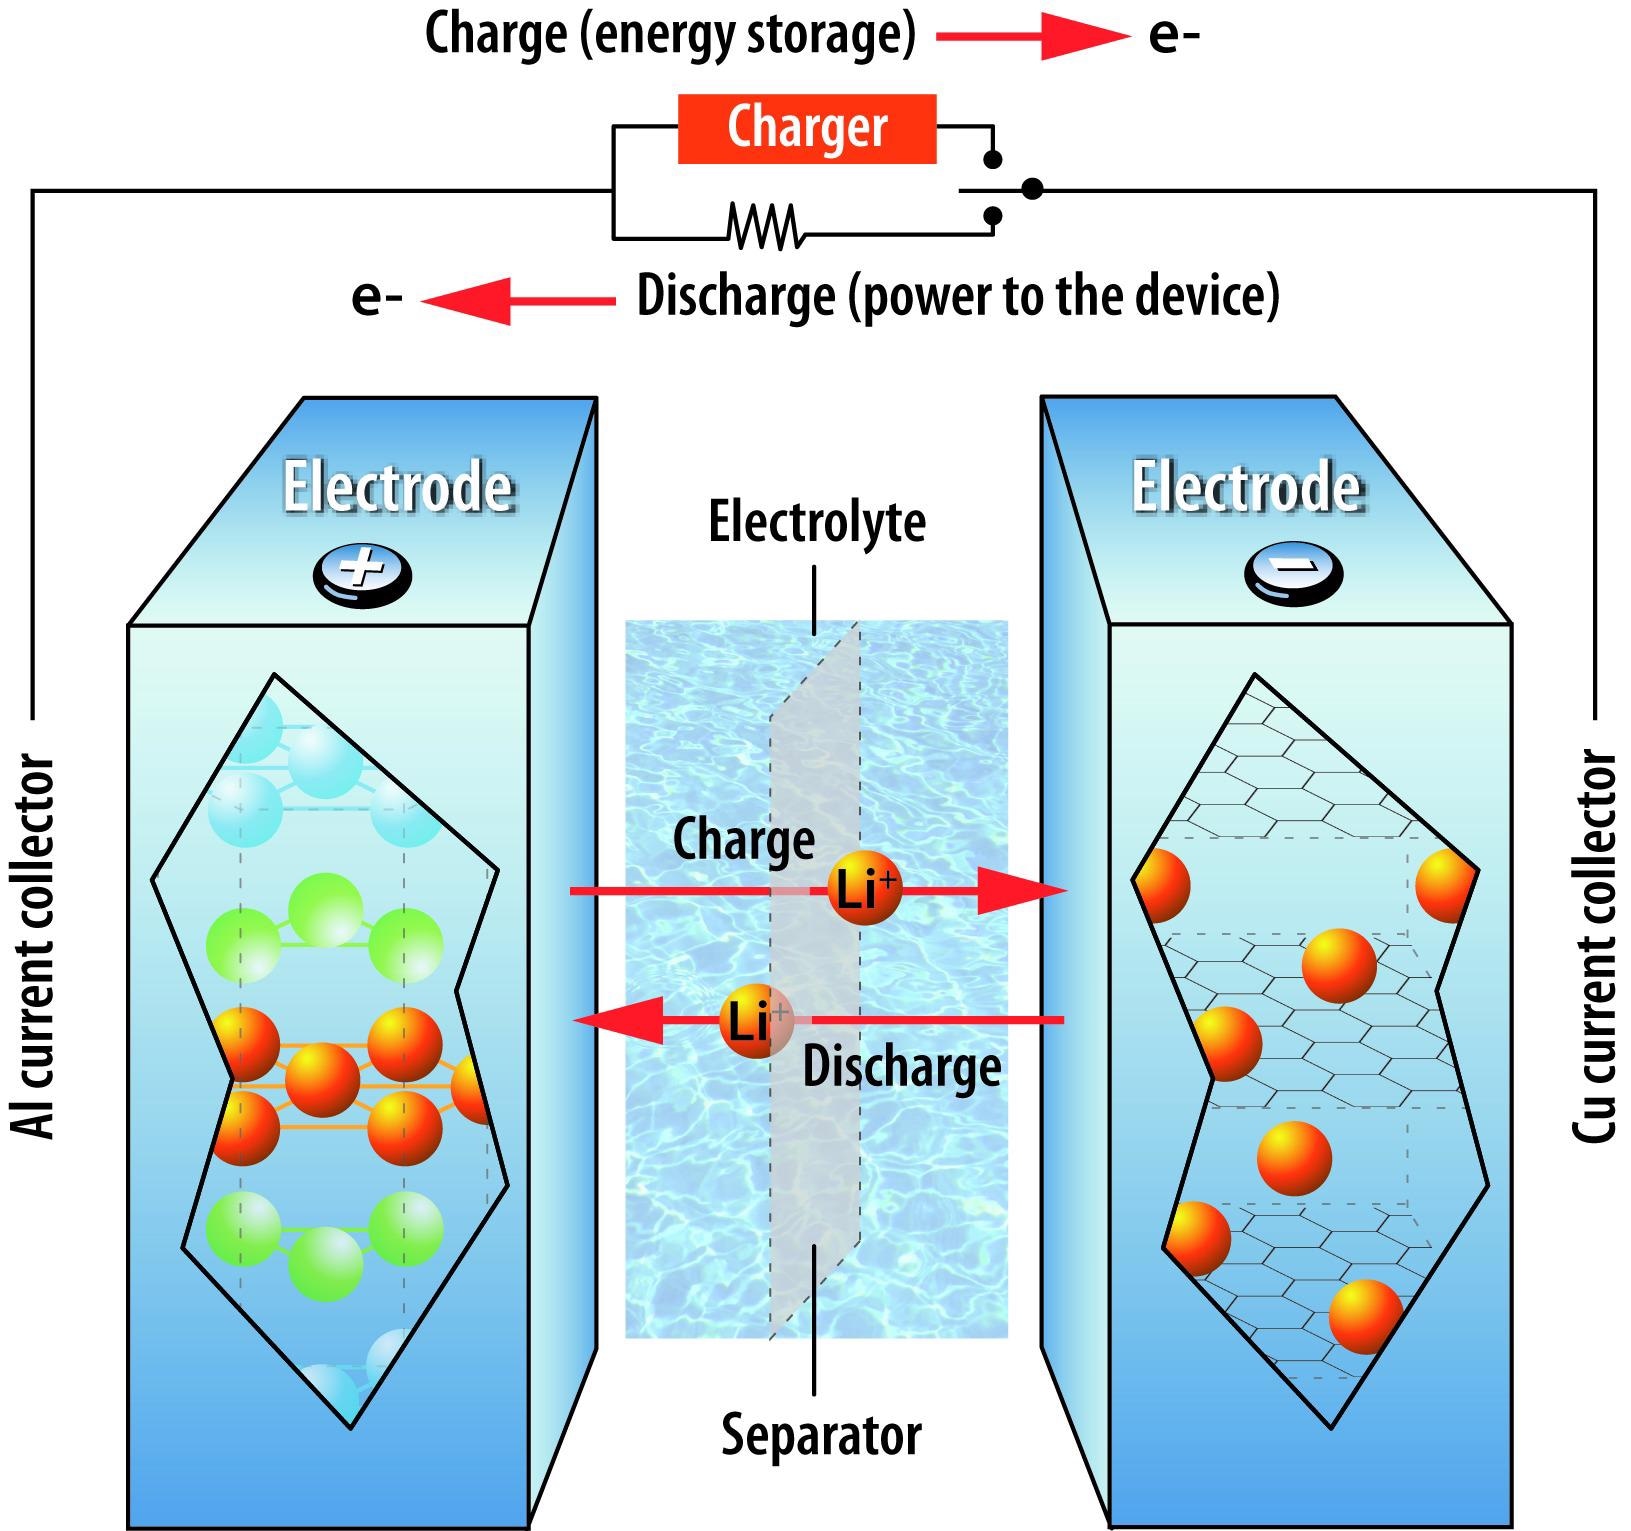 Effect of Fast-Charging on Lithium-Ion Battery Performance